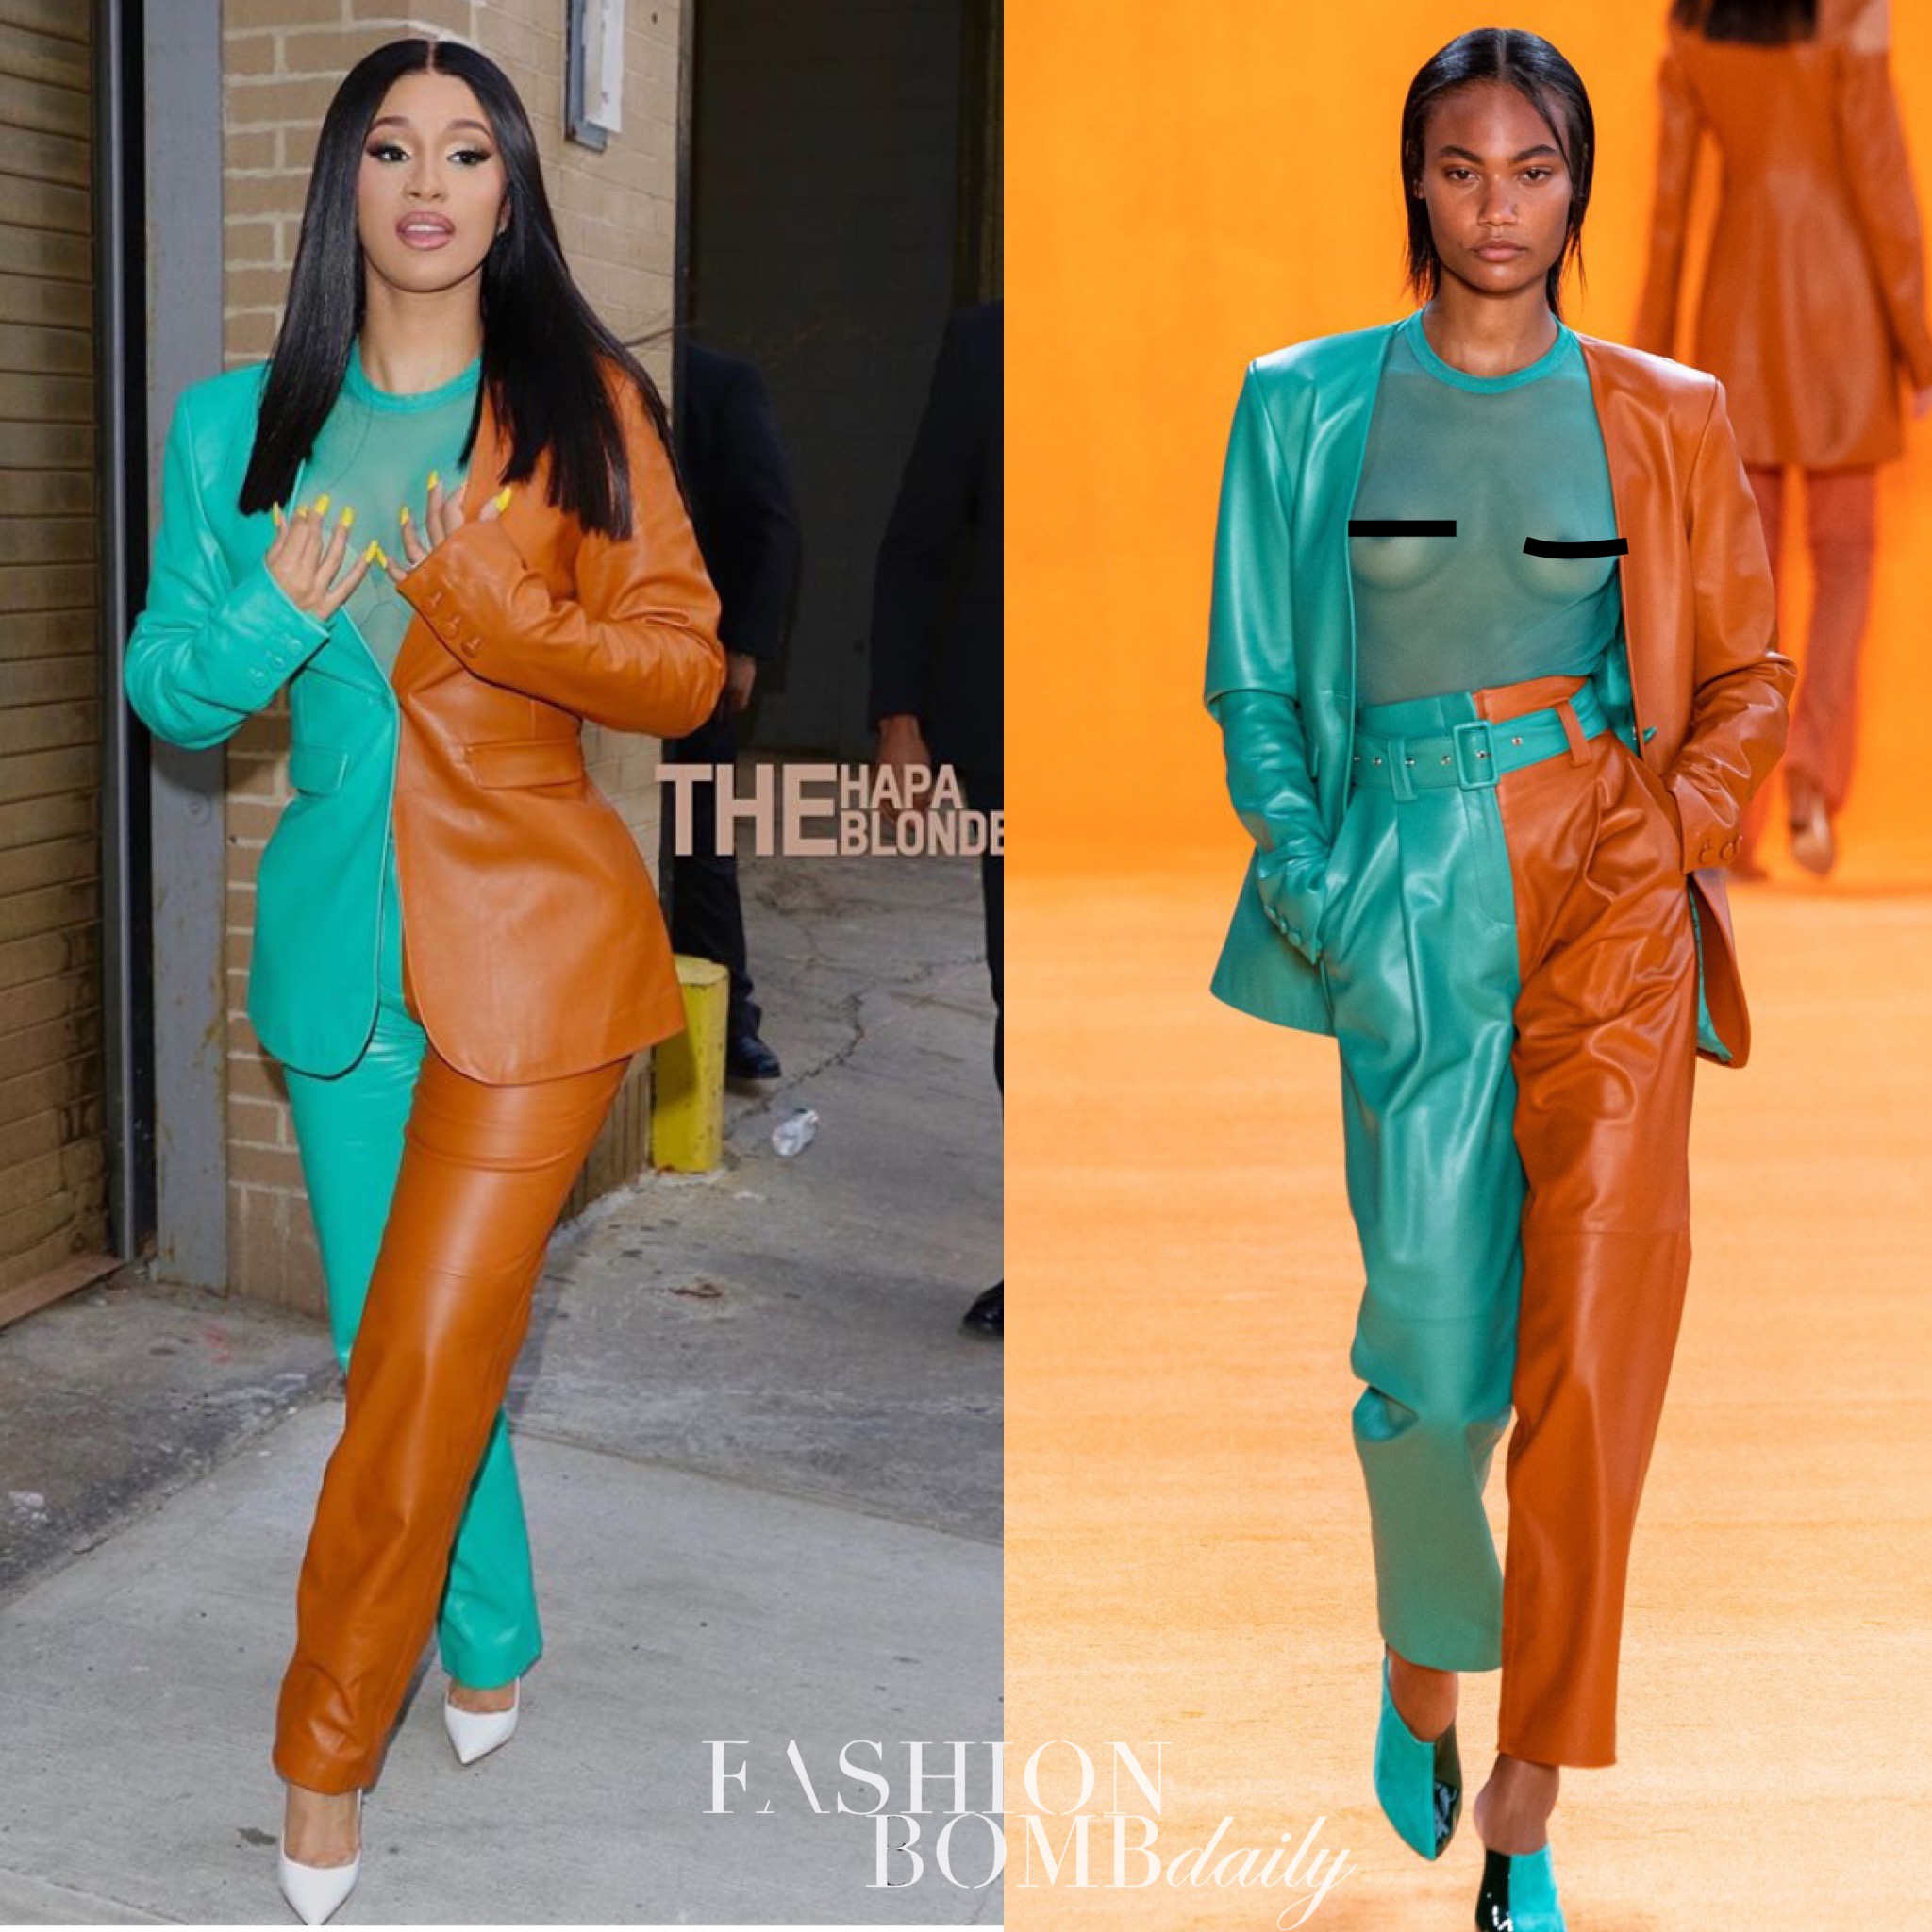 cardi b casual outfits